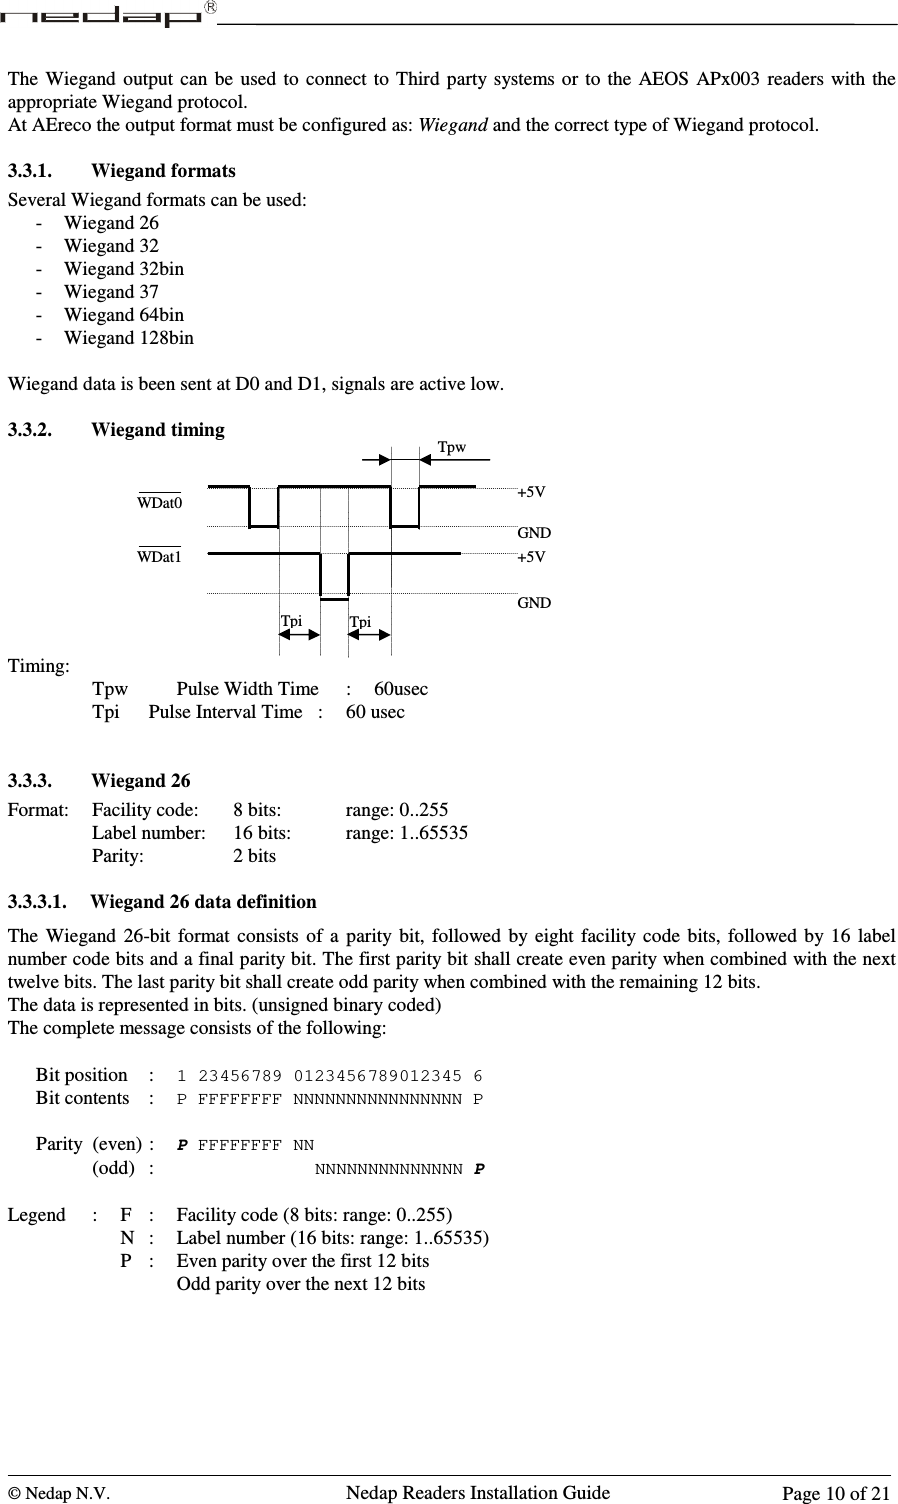  © Nedap N.V.                   Nedap Readers Installation Guide      Page 10 of 21 The  Wiegand  output  can  be  used  to  connect to Third  party systems or to the AEOS  APx003  readers  with  the appropriate Wiegand protocol. At AEreco the output format must be configured as: Wiegand and the correct type of Wiegand protocol.  3.3.1. Wiegand formats Several Wiegand formats can be used: - Wiegand 26 - Wiegand 32 - Wiegand 32bin - Wiegand 37 - Wiegand 64bin - Wiegand 128bin  Wiegand data is been sent at D0 and D1, signals are active low.  3.3.2. Wiegand timing          Timing:                               Tpw    Pulse Width Time  :  60usec        Tpi   Pulse Interval Time  :  60 usec   3.3.3. Wiegand 26 Format:  Facility code:   8 bits:      range: 0..255       Label number:  16 bits:    range: 1..65535       Parity:       2 bits  3.3.3.1. Wiegand 26 data definition The  Wiegand  26-bit  format  consists  of  a  parity  bit,  followed  by  eight facility  code  bits,  followed  by 16  label number code bits and a final parity bit. The first parity bit shall create even parity when combined with the next twelve bits. The last parity bit shall create odd parity when combined with the remaining 12 bits. The data is represented in bits. (unsigned binary coded) The complete message consists of the following:  Bit position  : 1 23456789 0123456789012345 6 Bit contents  : P FFFFFFFF NNNNNNNNNNNNNNNN P  Parity  (even) : P FFFFFFFF NN     (odd)  :                              NNNNNNNNNNNNNN P  Legend  :  F  :  Facility code (8 bits: range: 0..255)         N  :  Label number (16 bits: range: 1..65535)         P  :  Even parity over the first 12 bits Odd parity over the next 12 bits  WDat1 Tpw +5V GND +5V GND WDat0 Tpi Tpi 